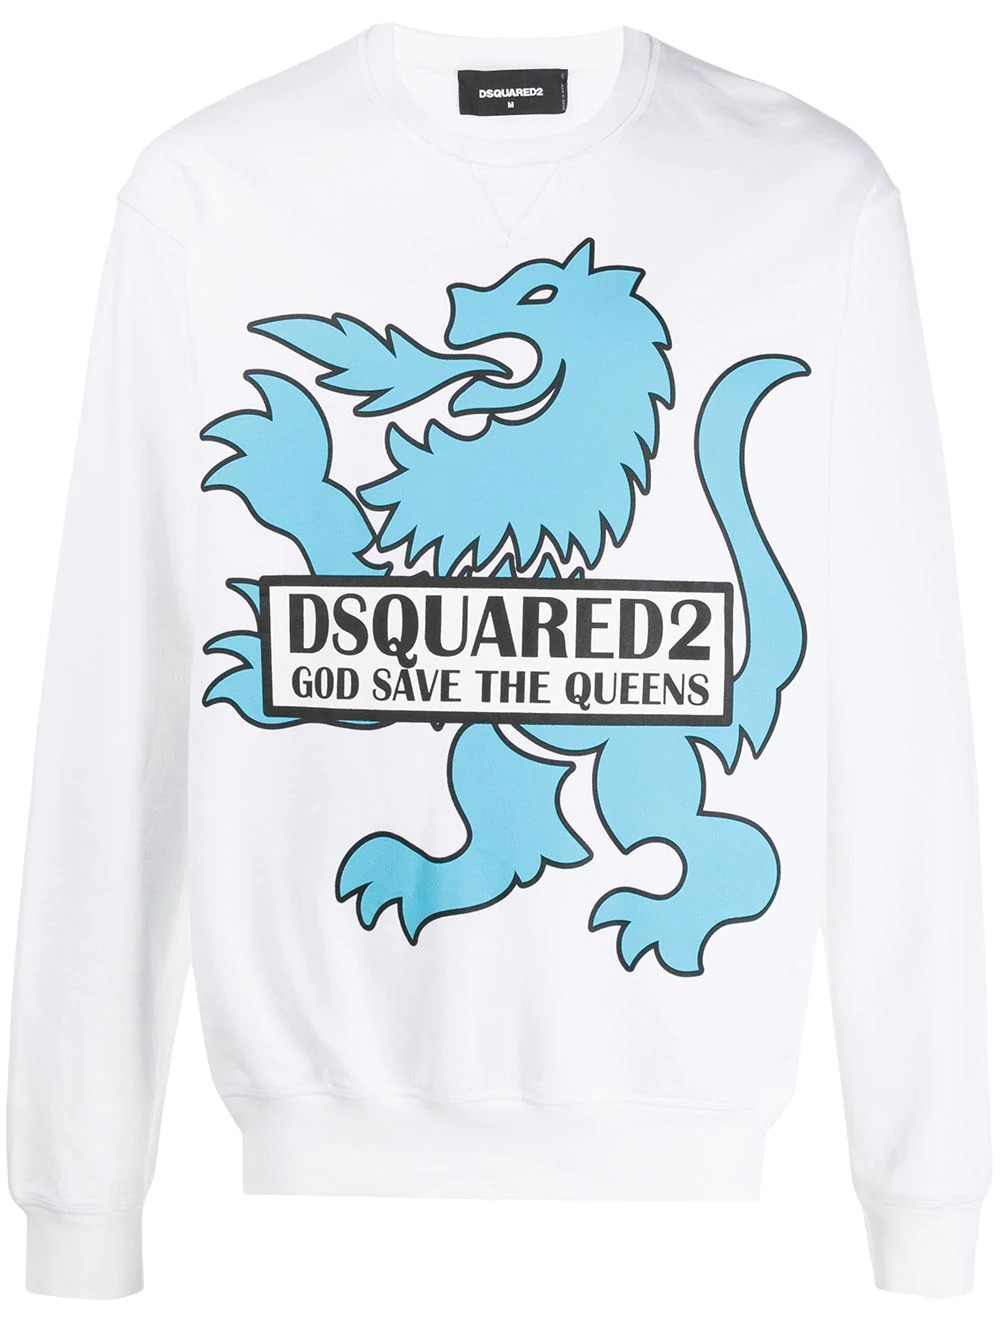 DSQUARED2 God Save The Queens mikina